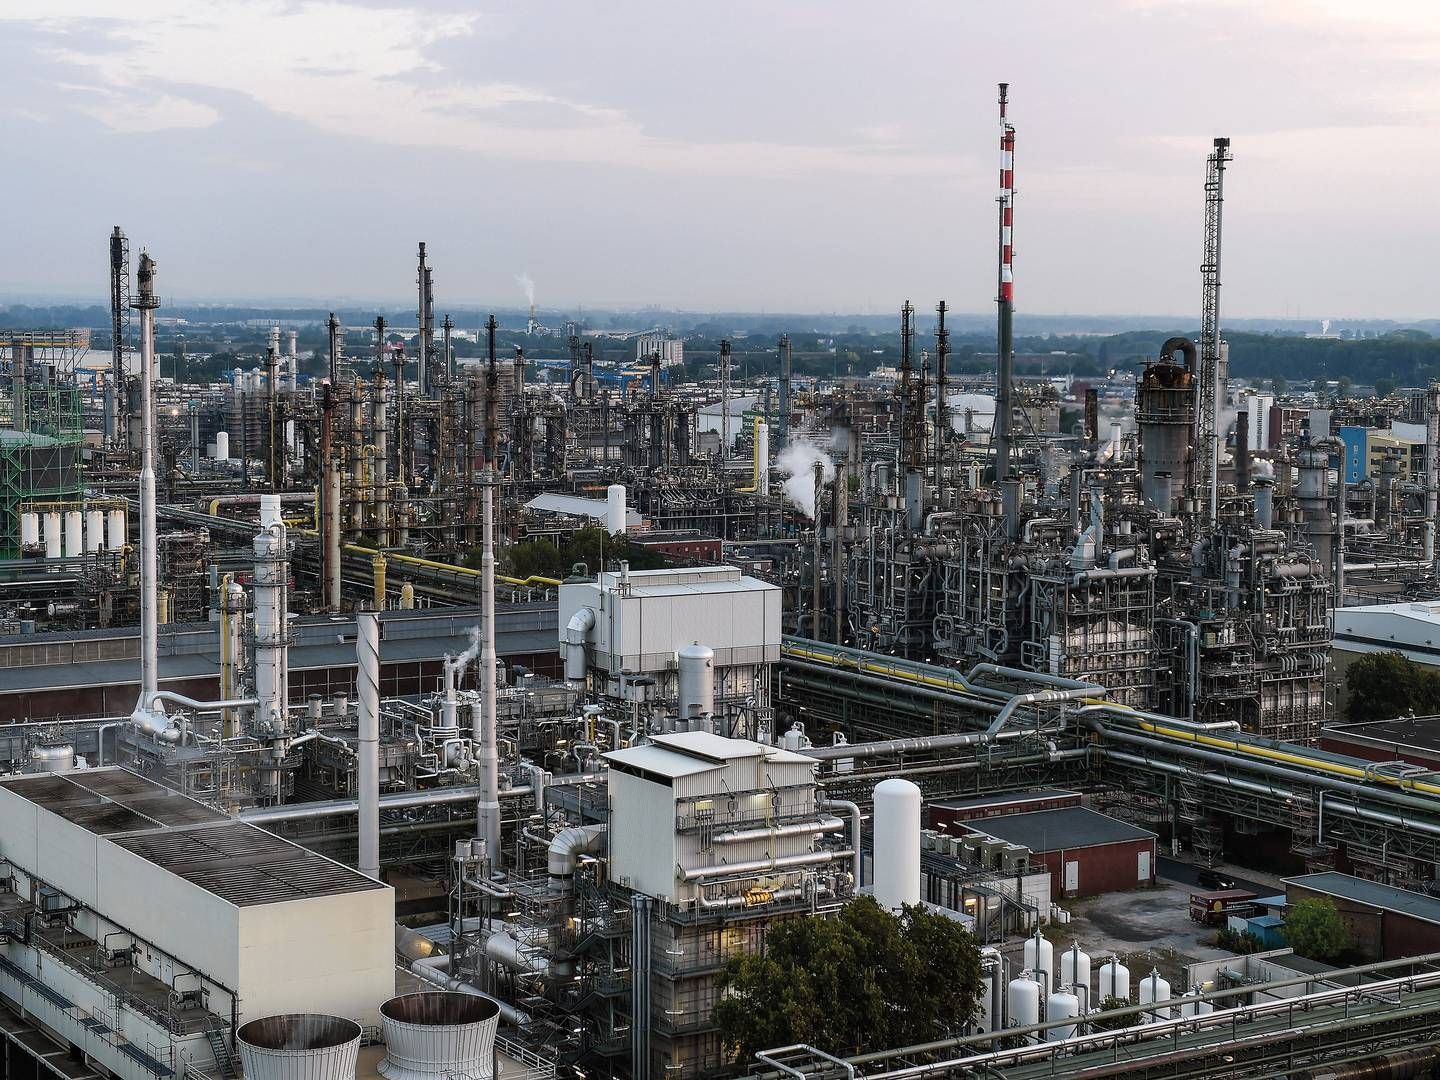 At the BASF production facility in Ludwigshafen, the annual power consumption amounts to approx. 6TWh – or roughly 1% of all of Germany’s electricity demand. | Foto: Basf/pr